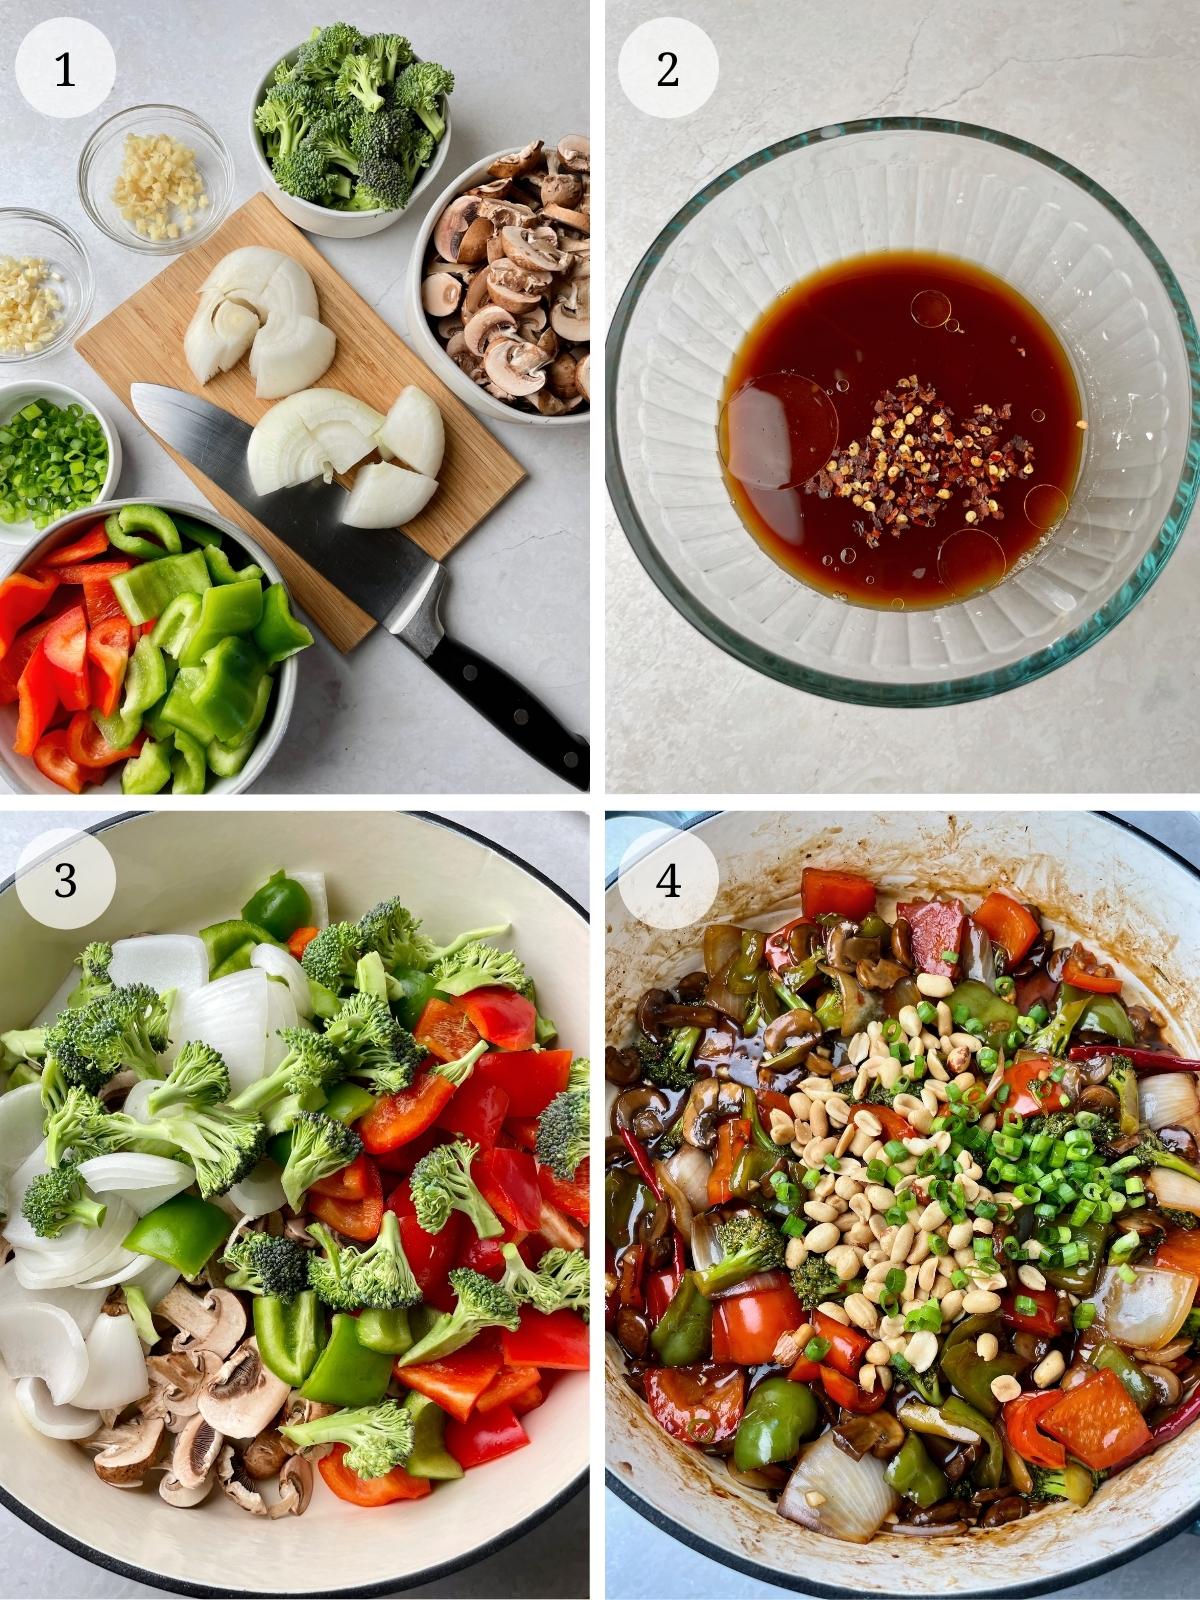 Steps for making kung pao veggies.